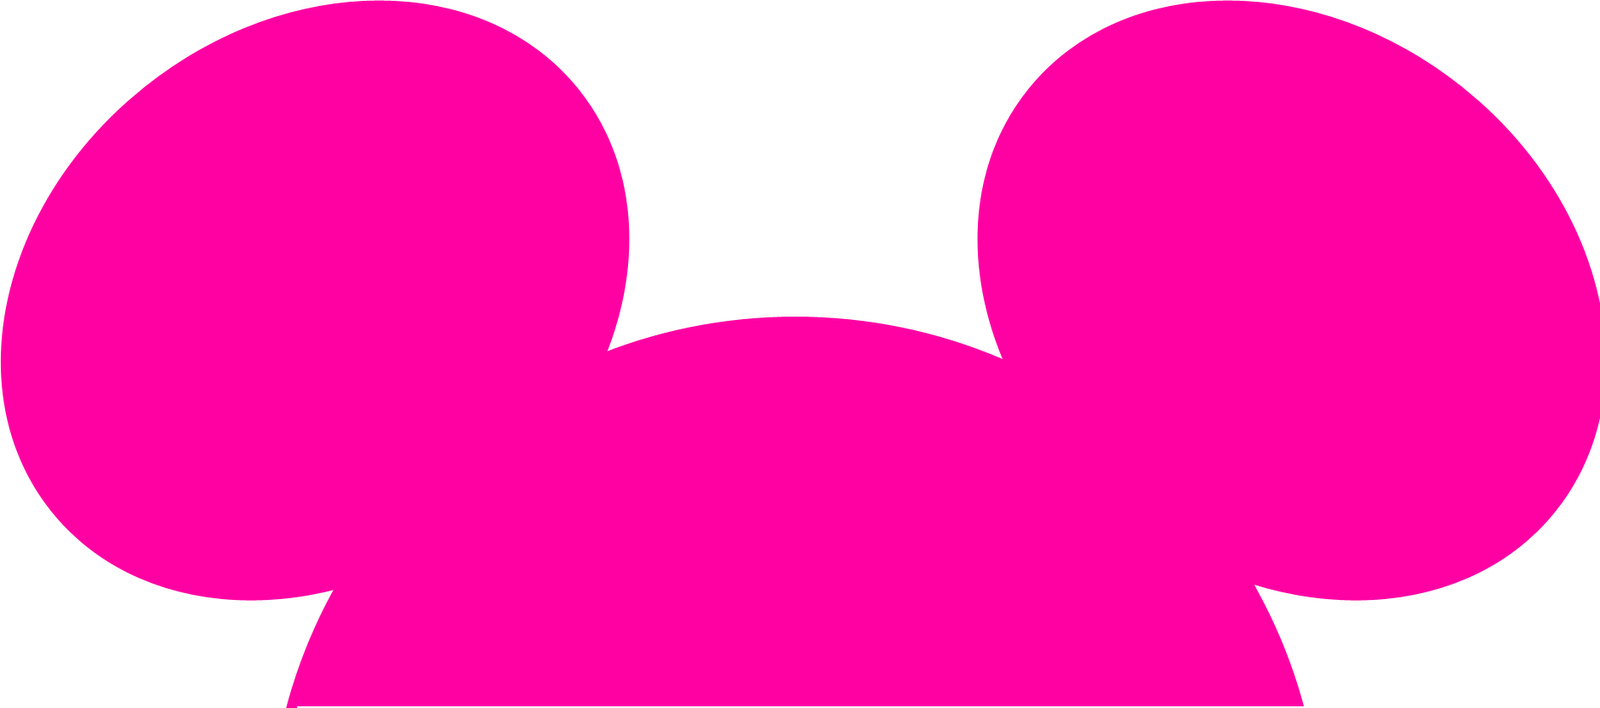 A Pink And Black Mouse Ears